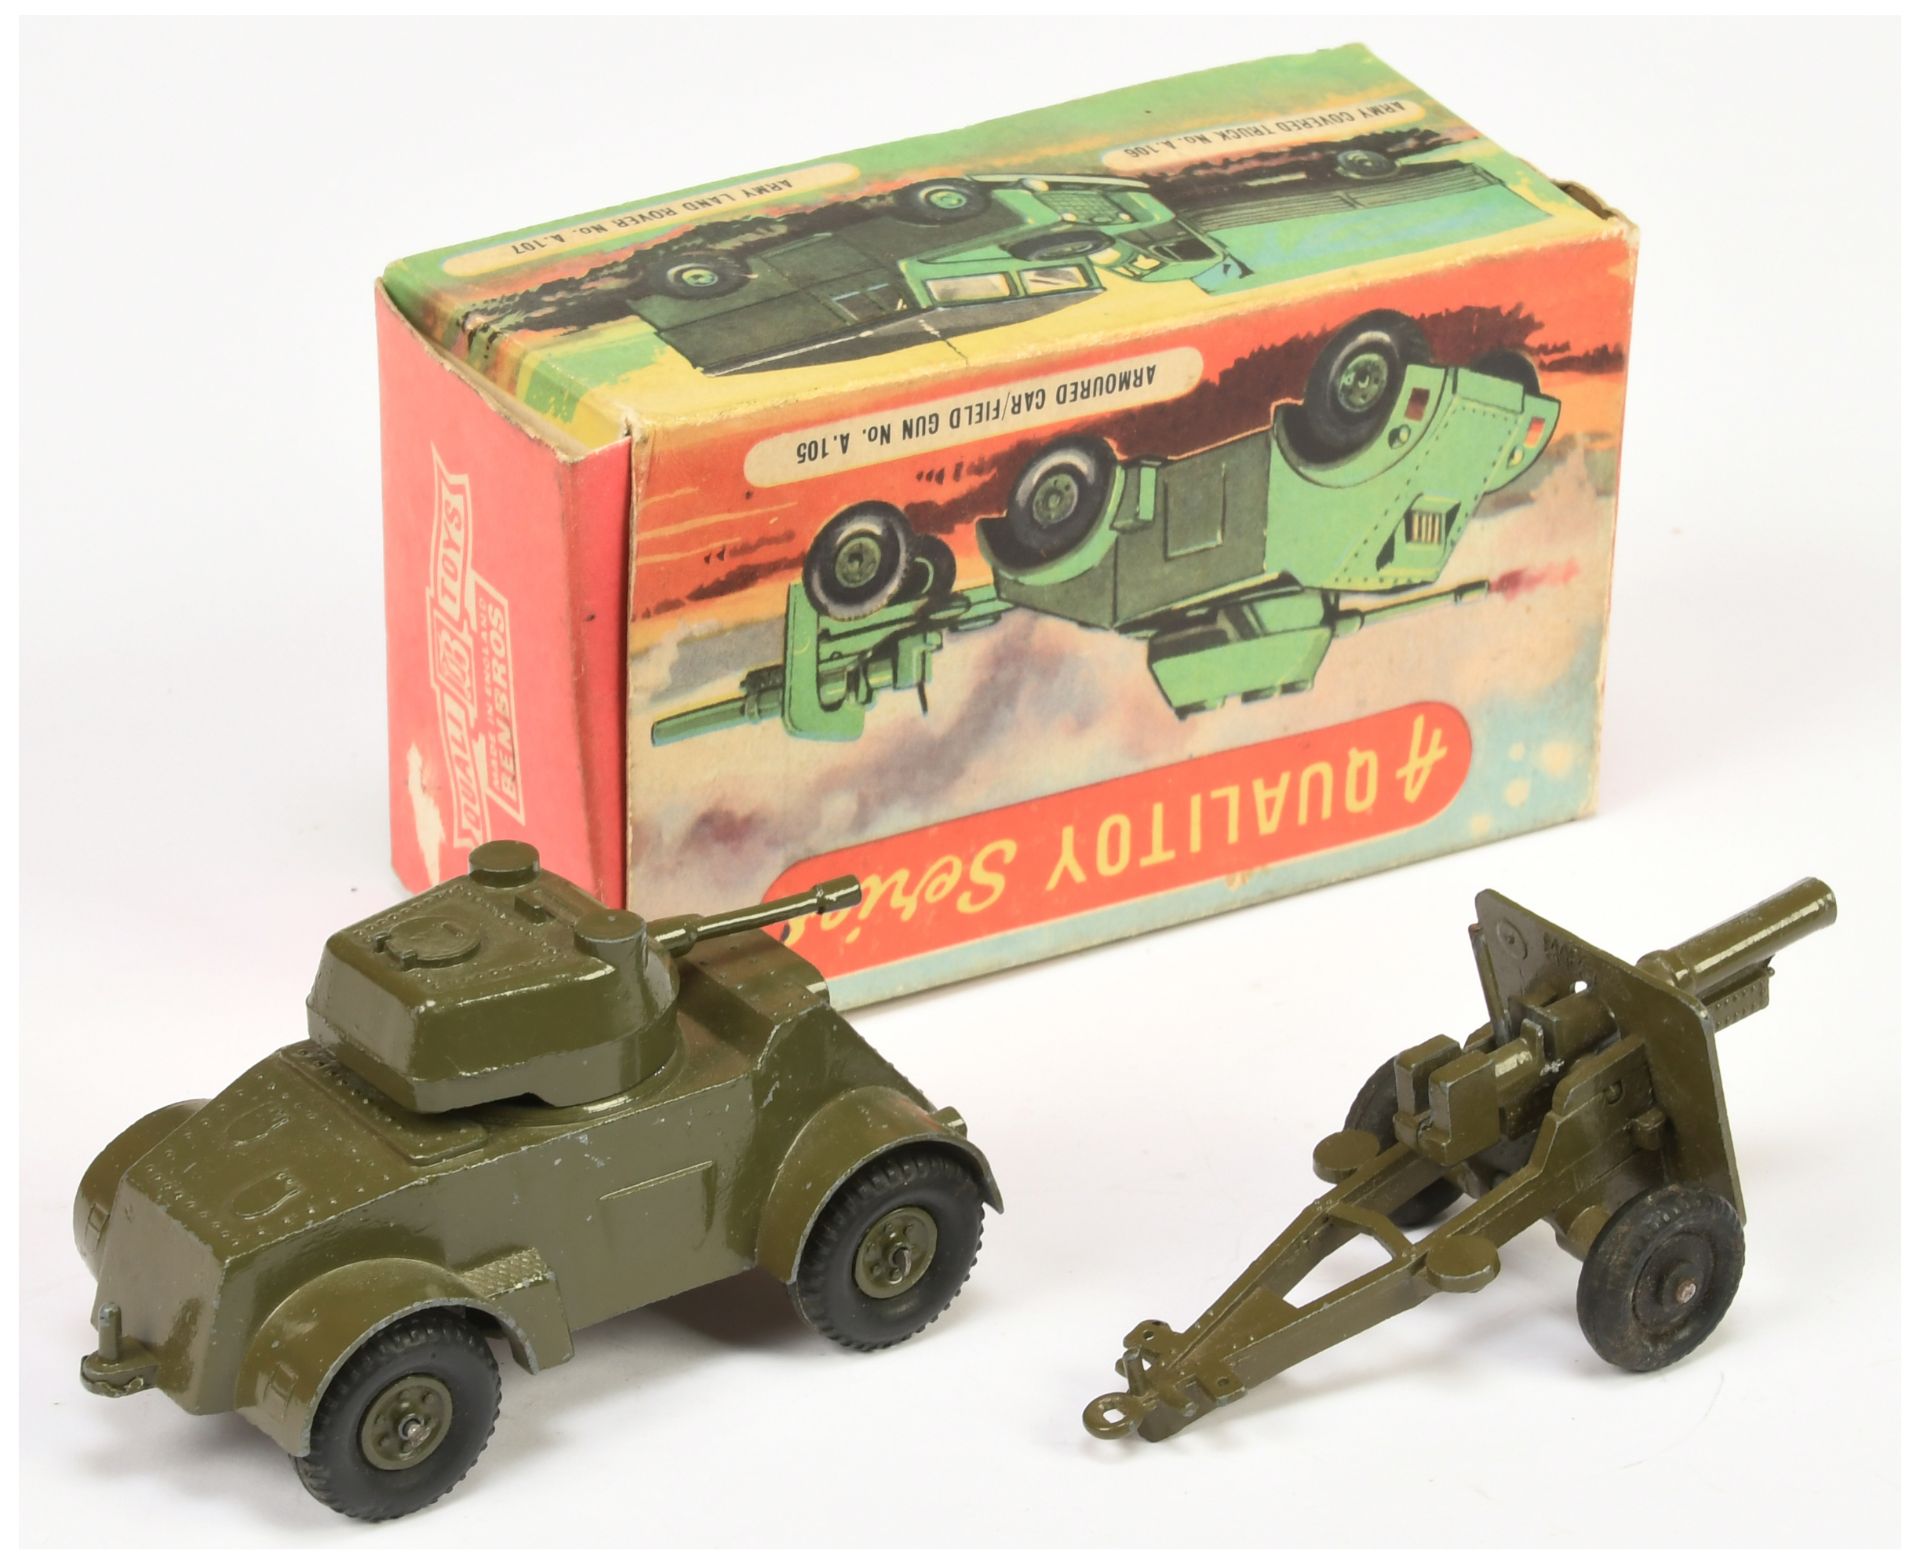 Benbros  Qualitoys Armoured car and field gun - olive green - Image 2 of 2